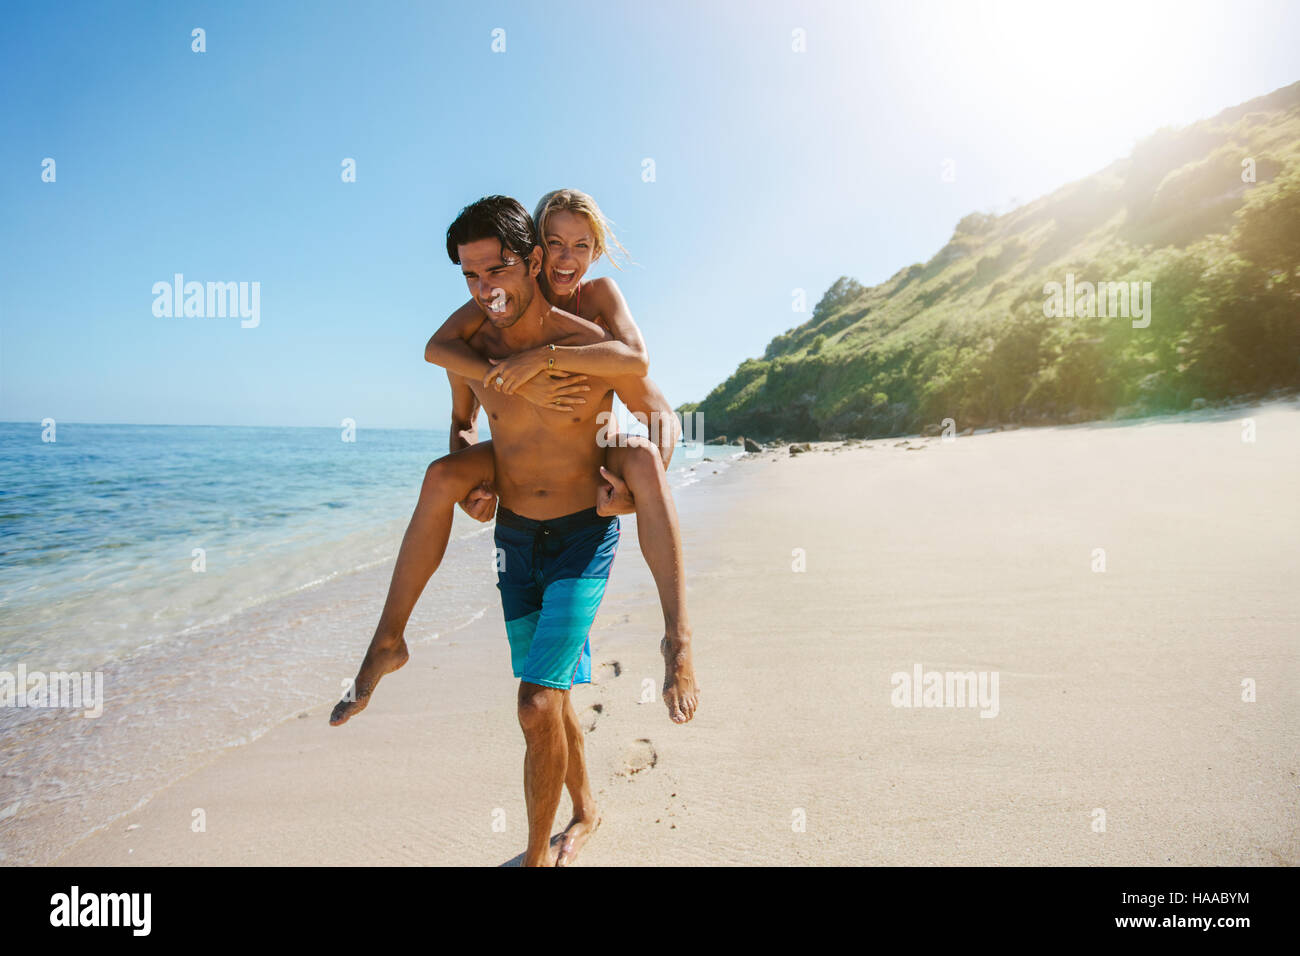 Portrait of man carrying girlfriend on his back along the sea shore. Man giving piggyback ride to girlfriend on the beach. Stock Photo